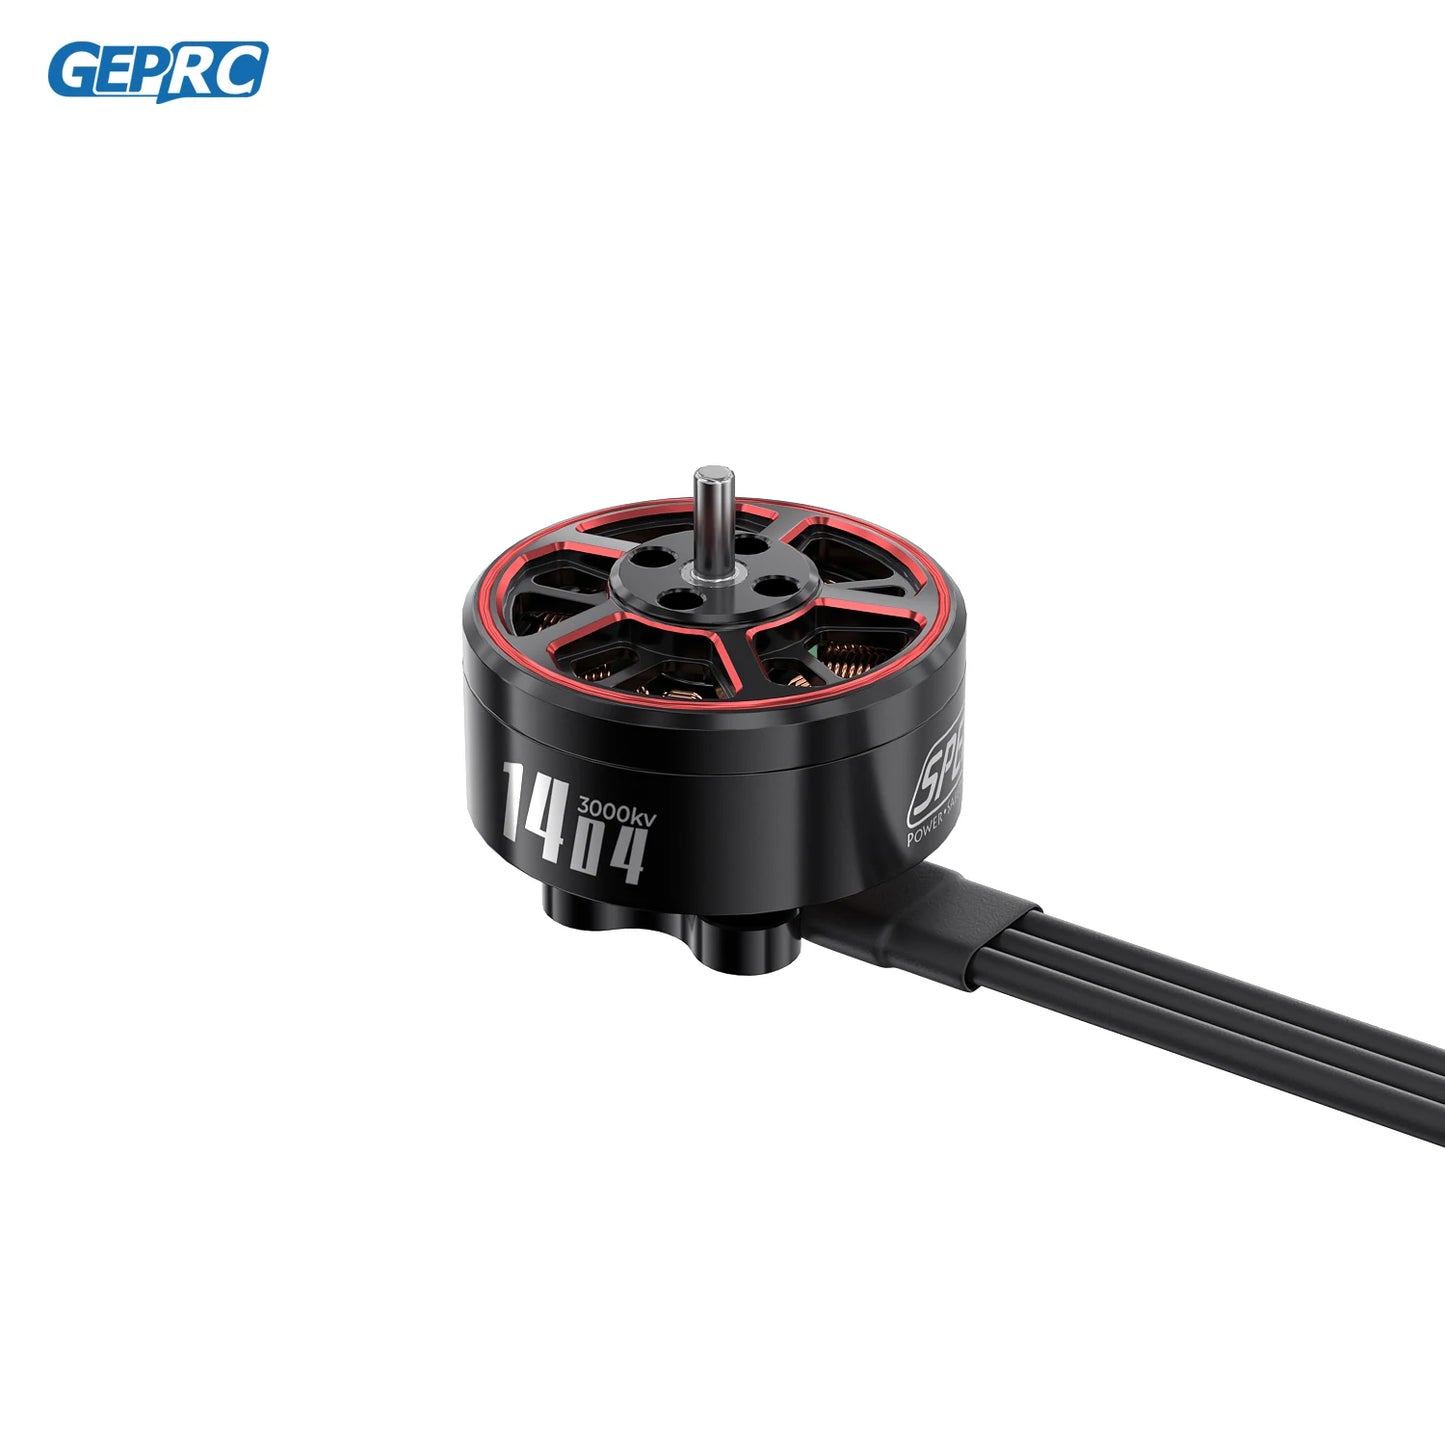 GEPRC SPEEDX2 1404 3000KV / 4600KV Motor Suitable for Tern-LR40 FPV Drones 2-inch 4-inch RC FPV Quadcopter Freestyle Drone